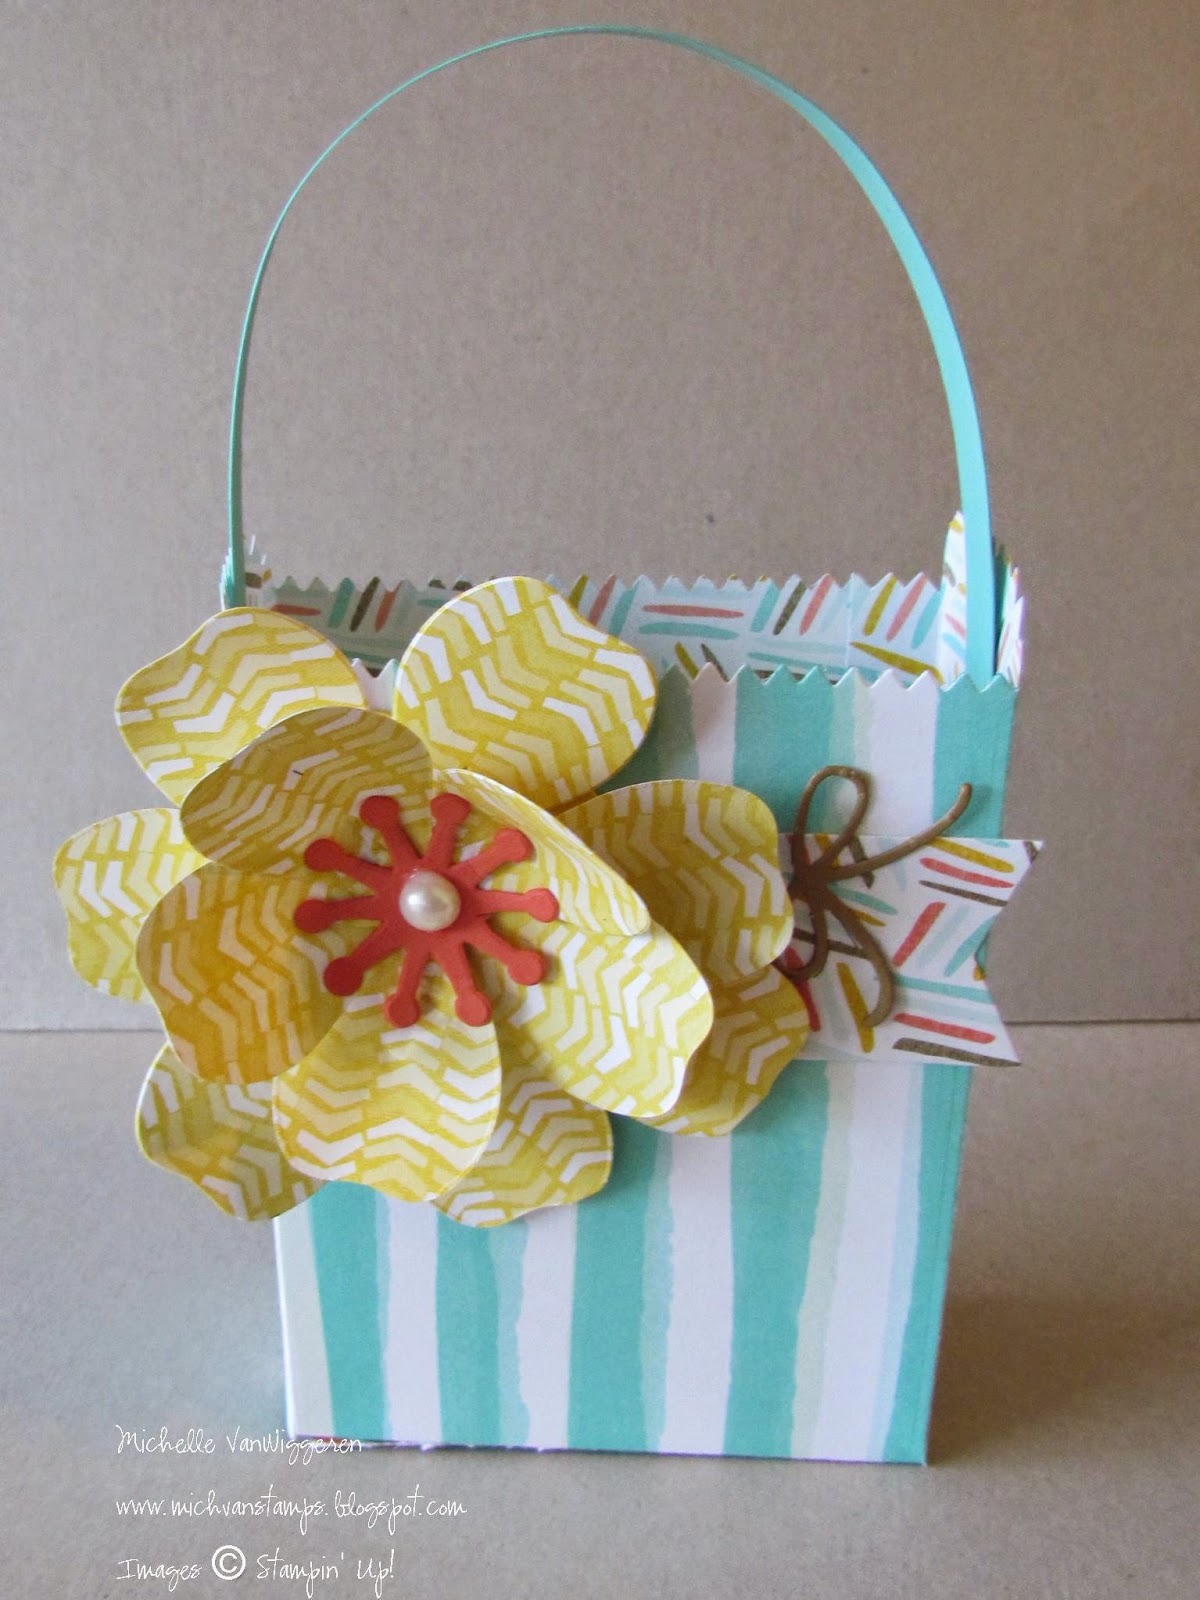 Michelle's Great Paper Chase: Mini Treat Bag Thinlits Alternate Projects